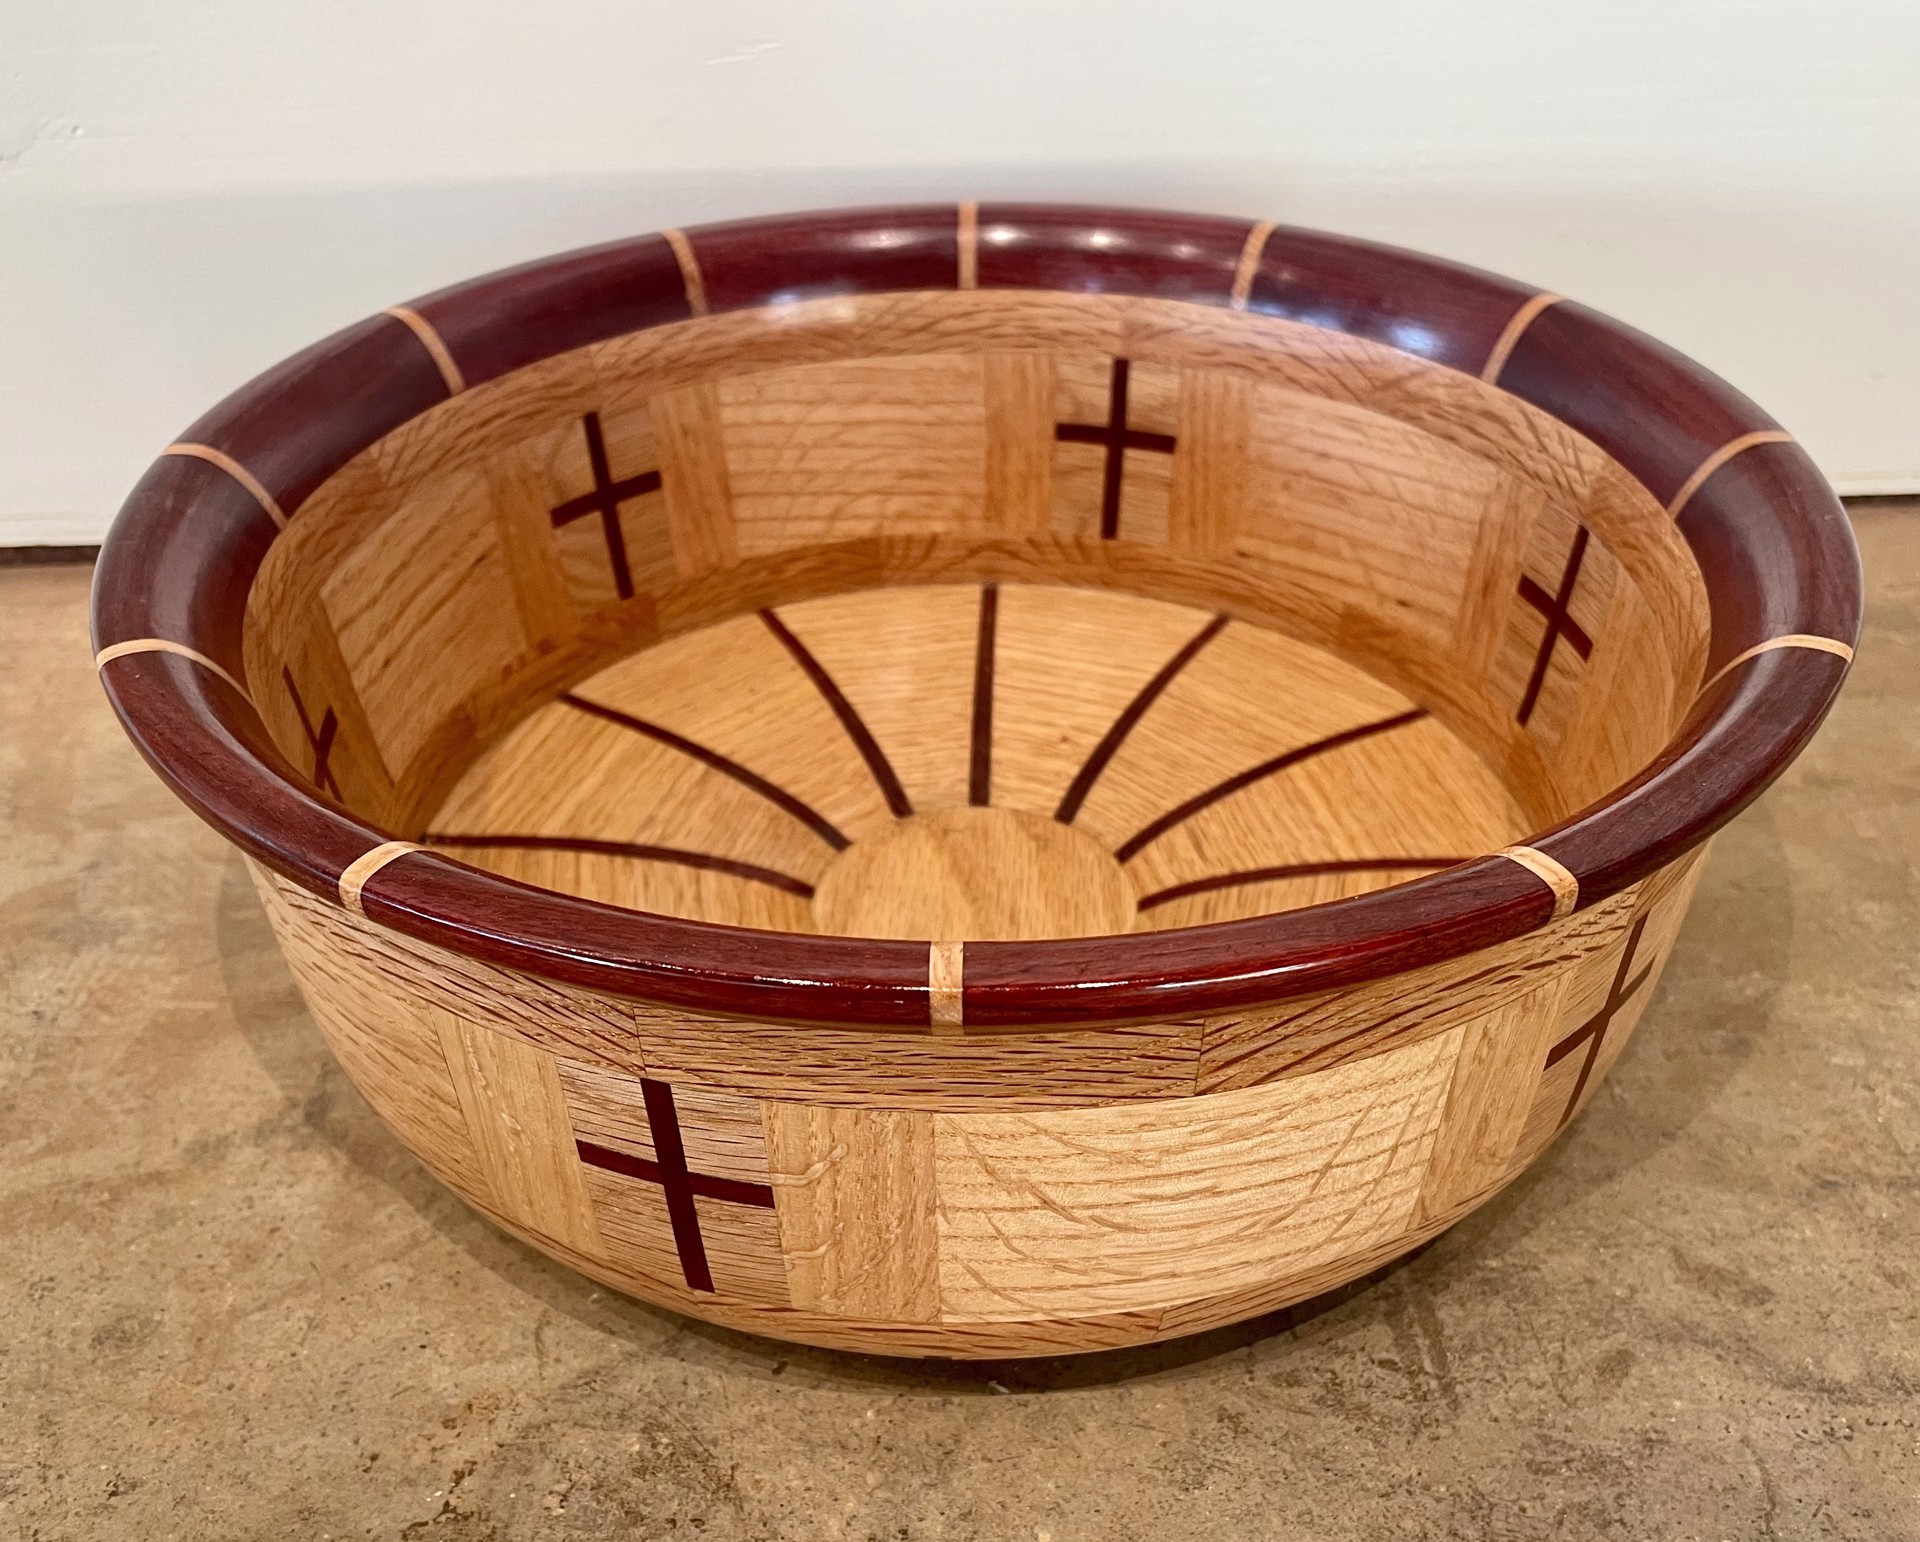 Hand Carved Bowl 3 by William Dunaway